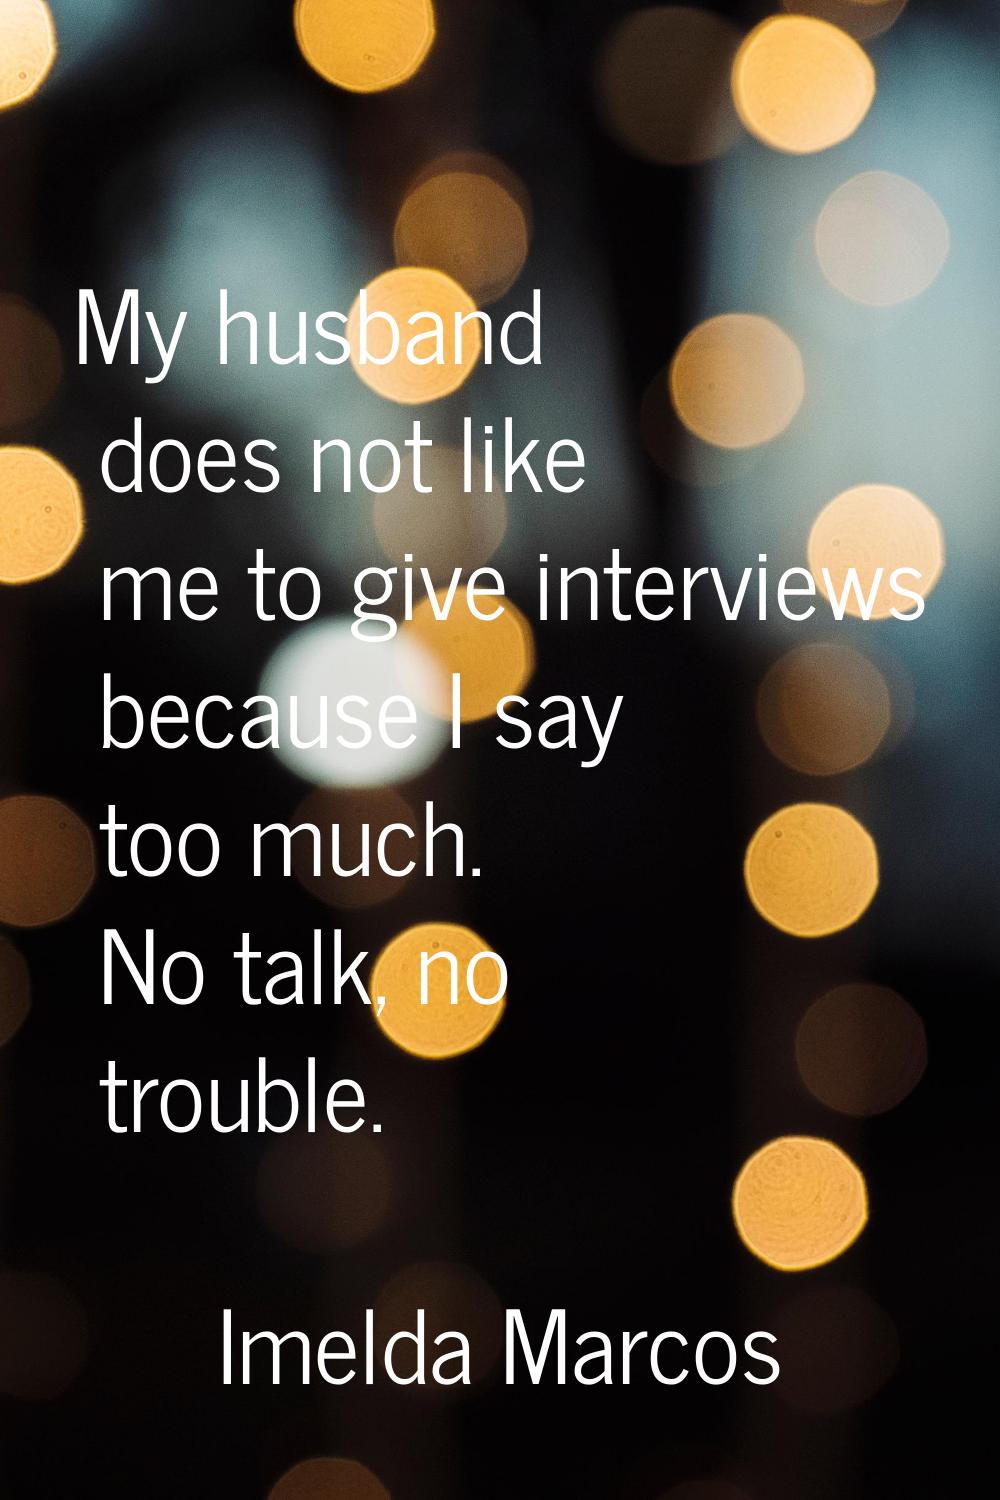 My husband does not like me to give interviews because I say too much. No talk, no trouble.